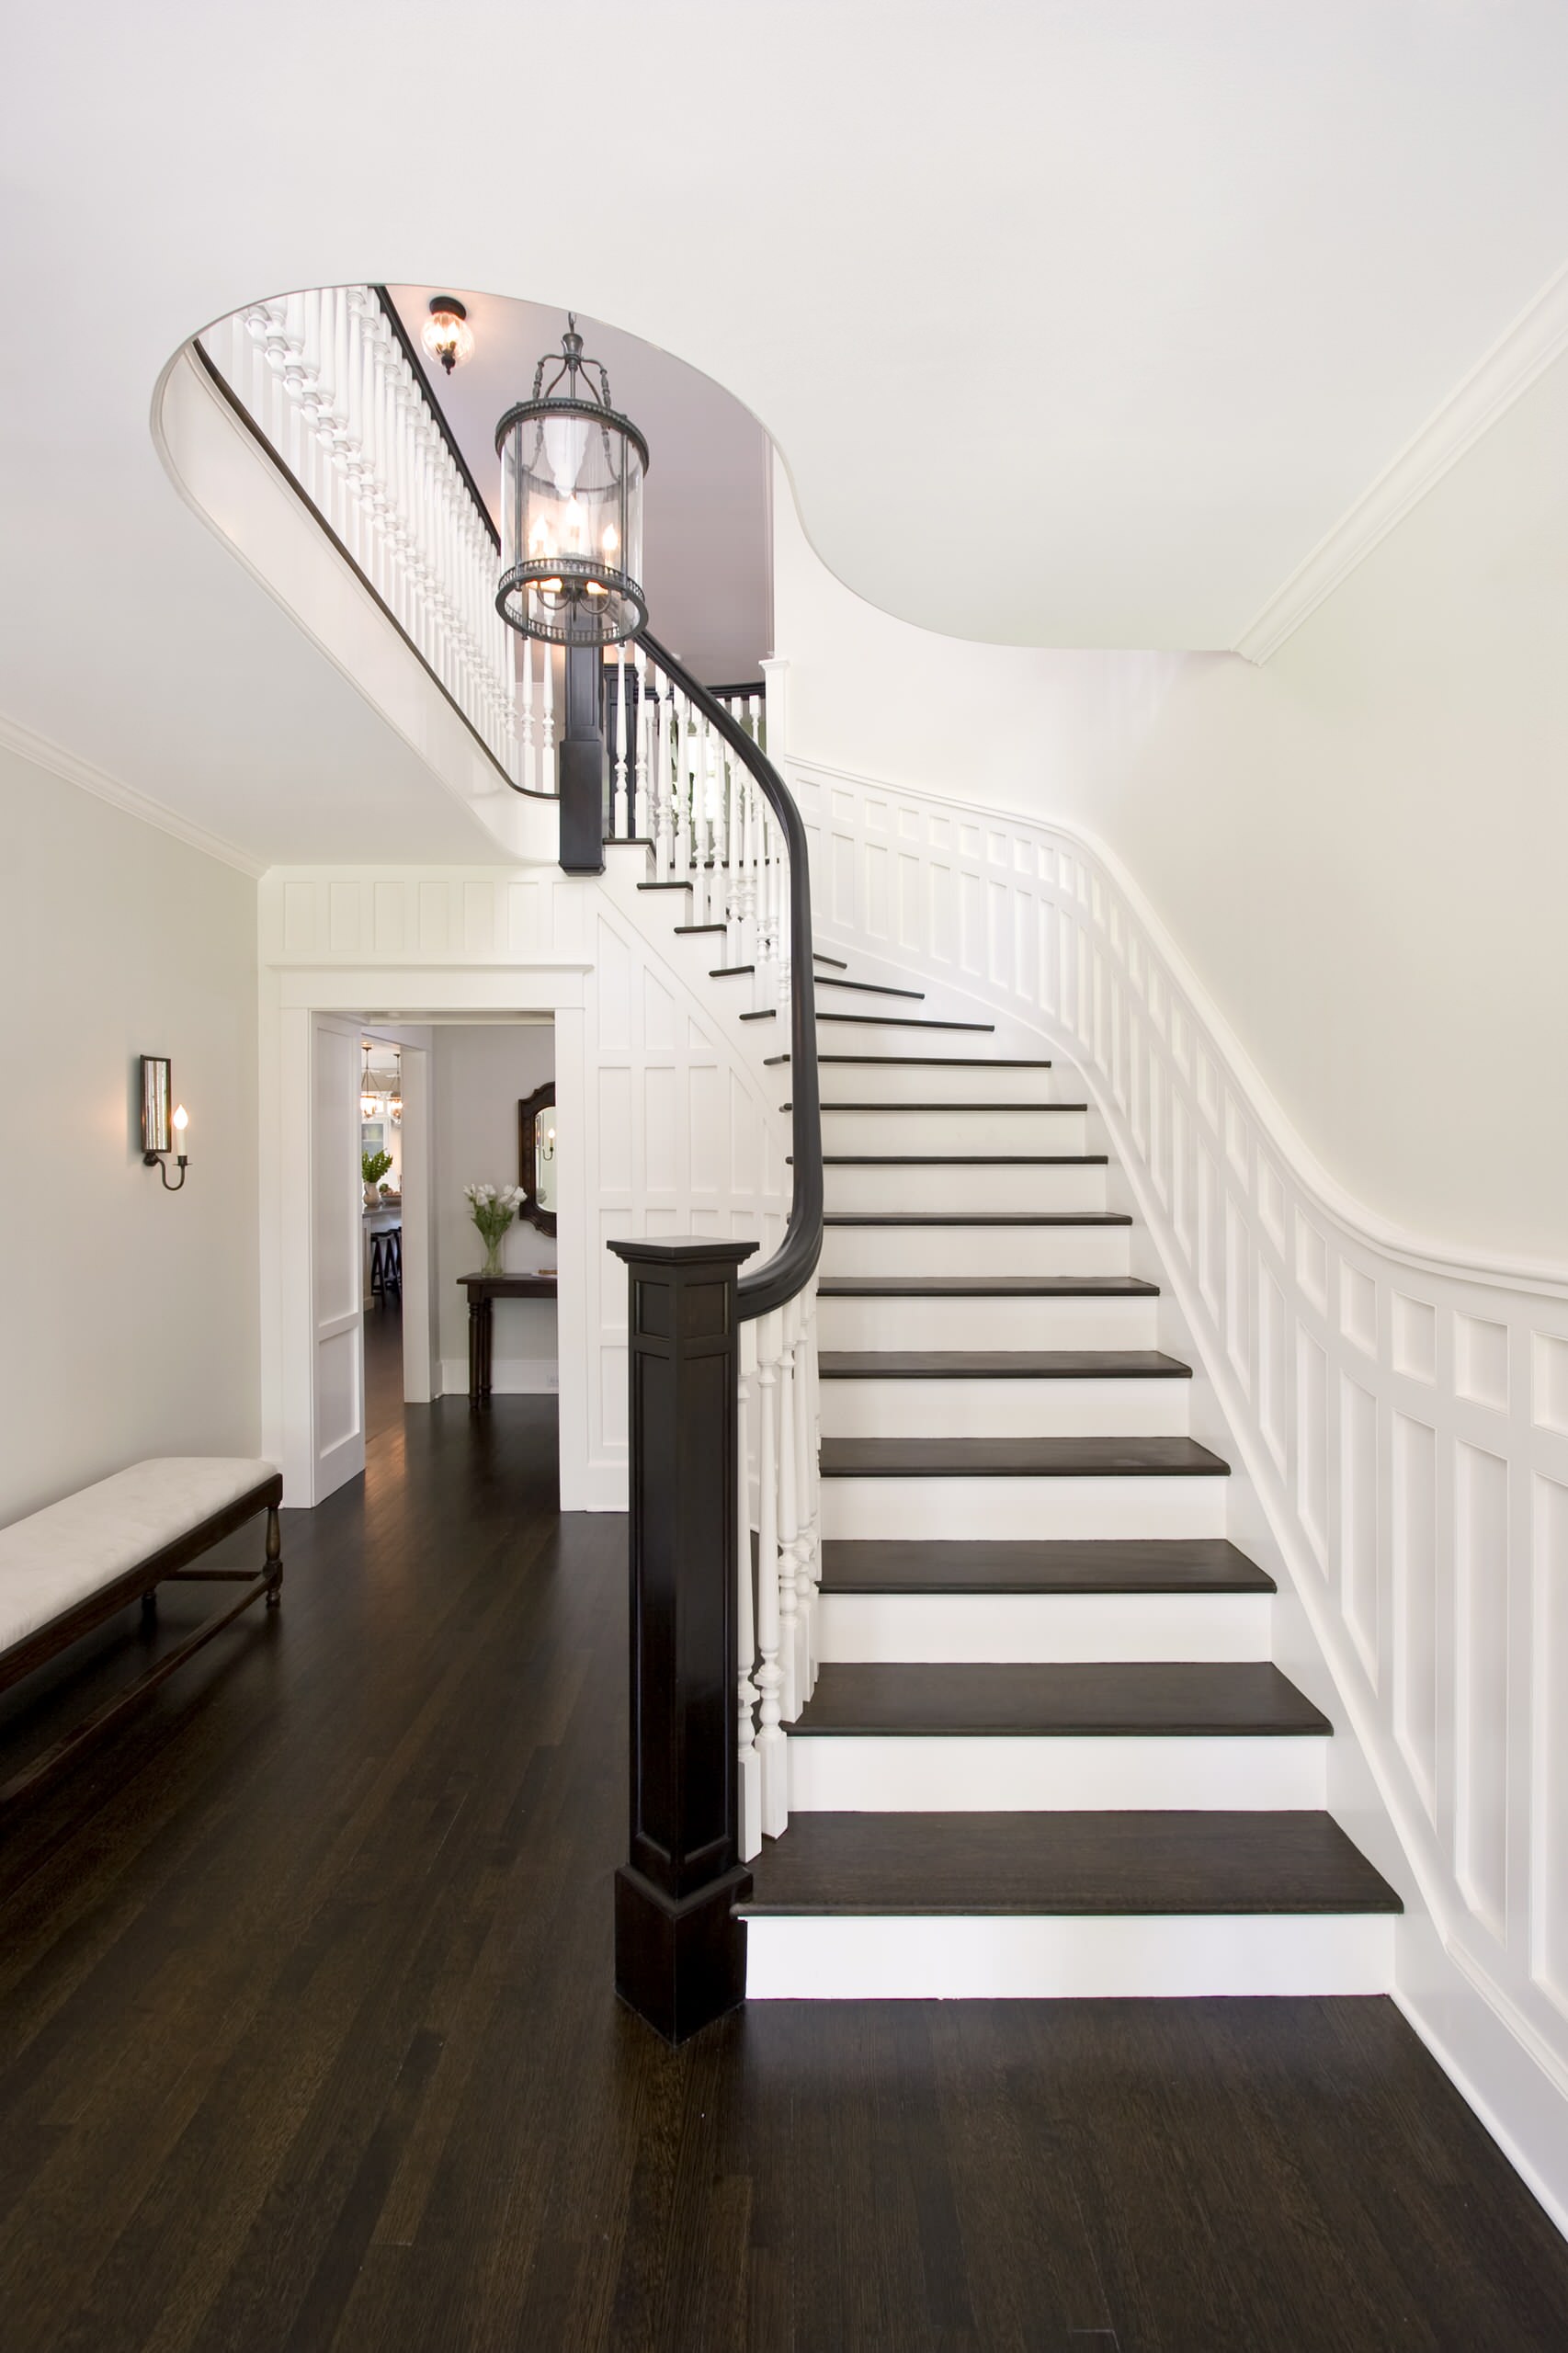 STAIRS CLASSIC - Staircase systems from Trapa